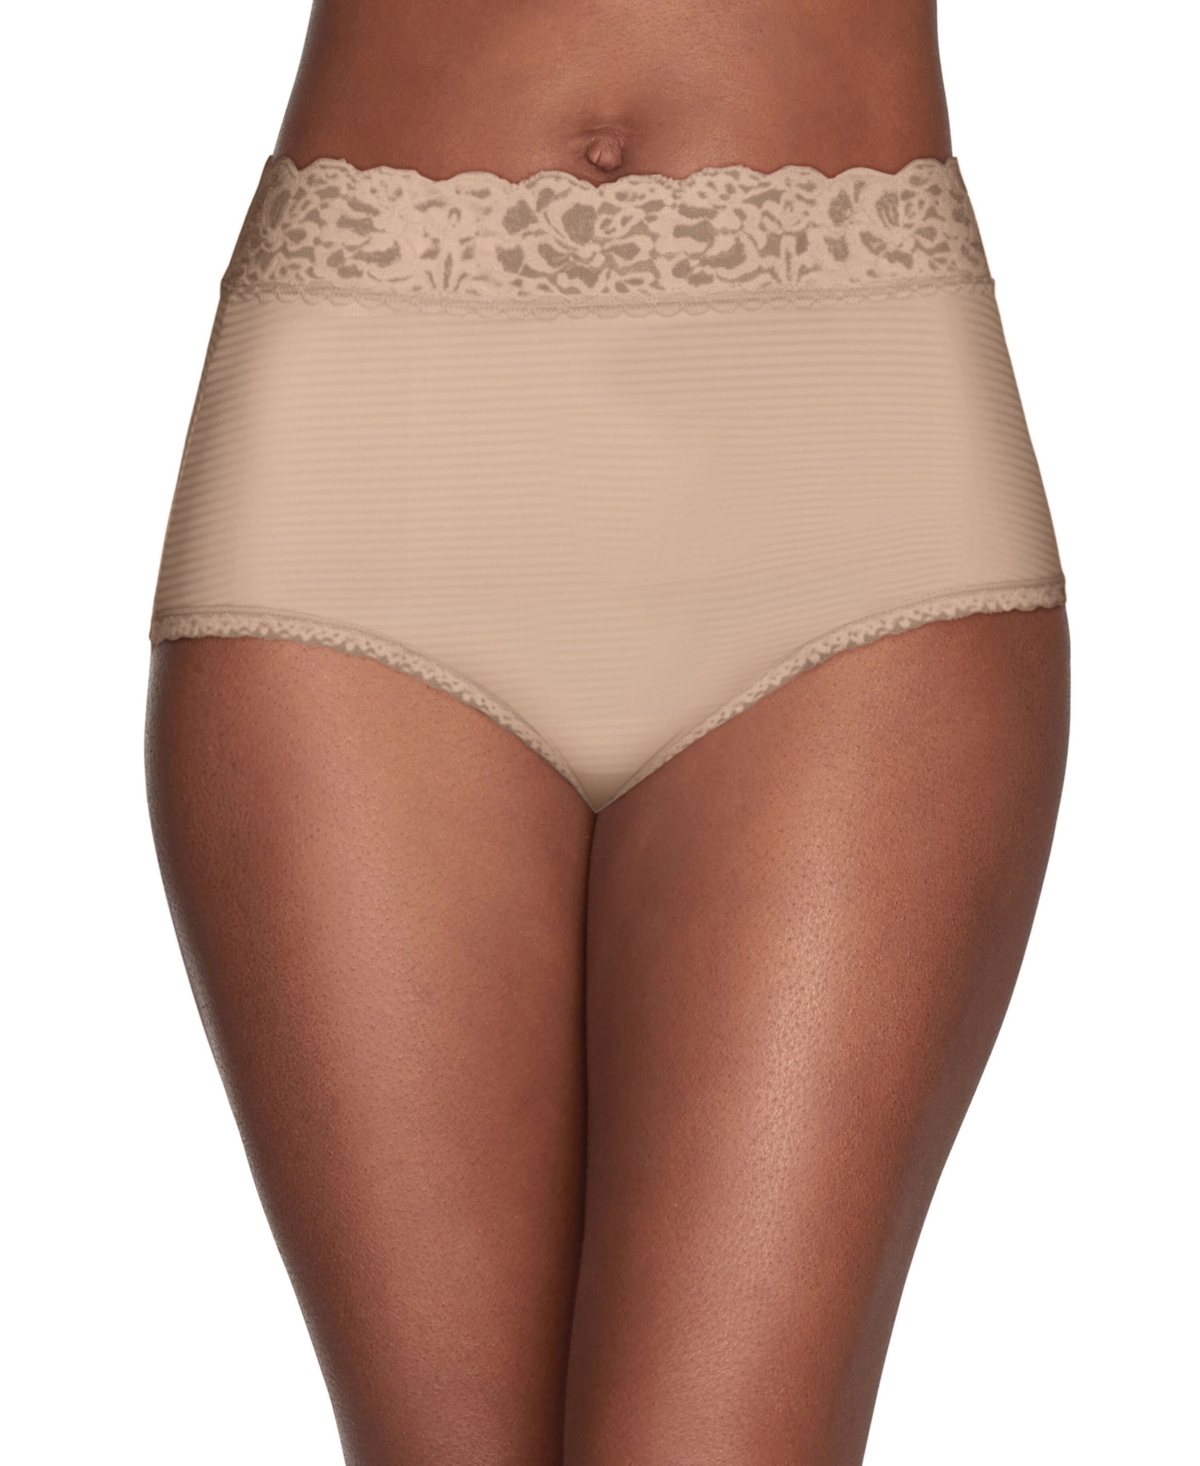 UPC 083626000111 product image for Vanity Fair Flattering Lace Stretch Brief Underwear 13281, also available in ext | upcitemdb.com